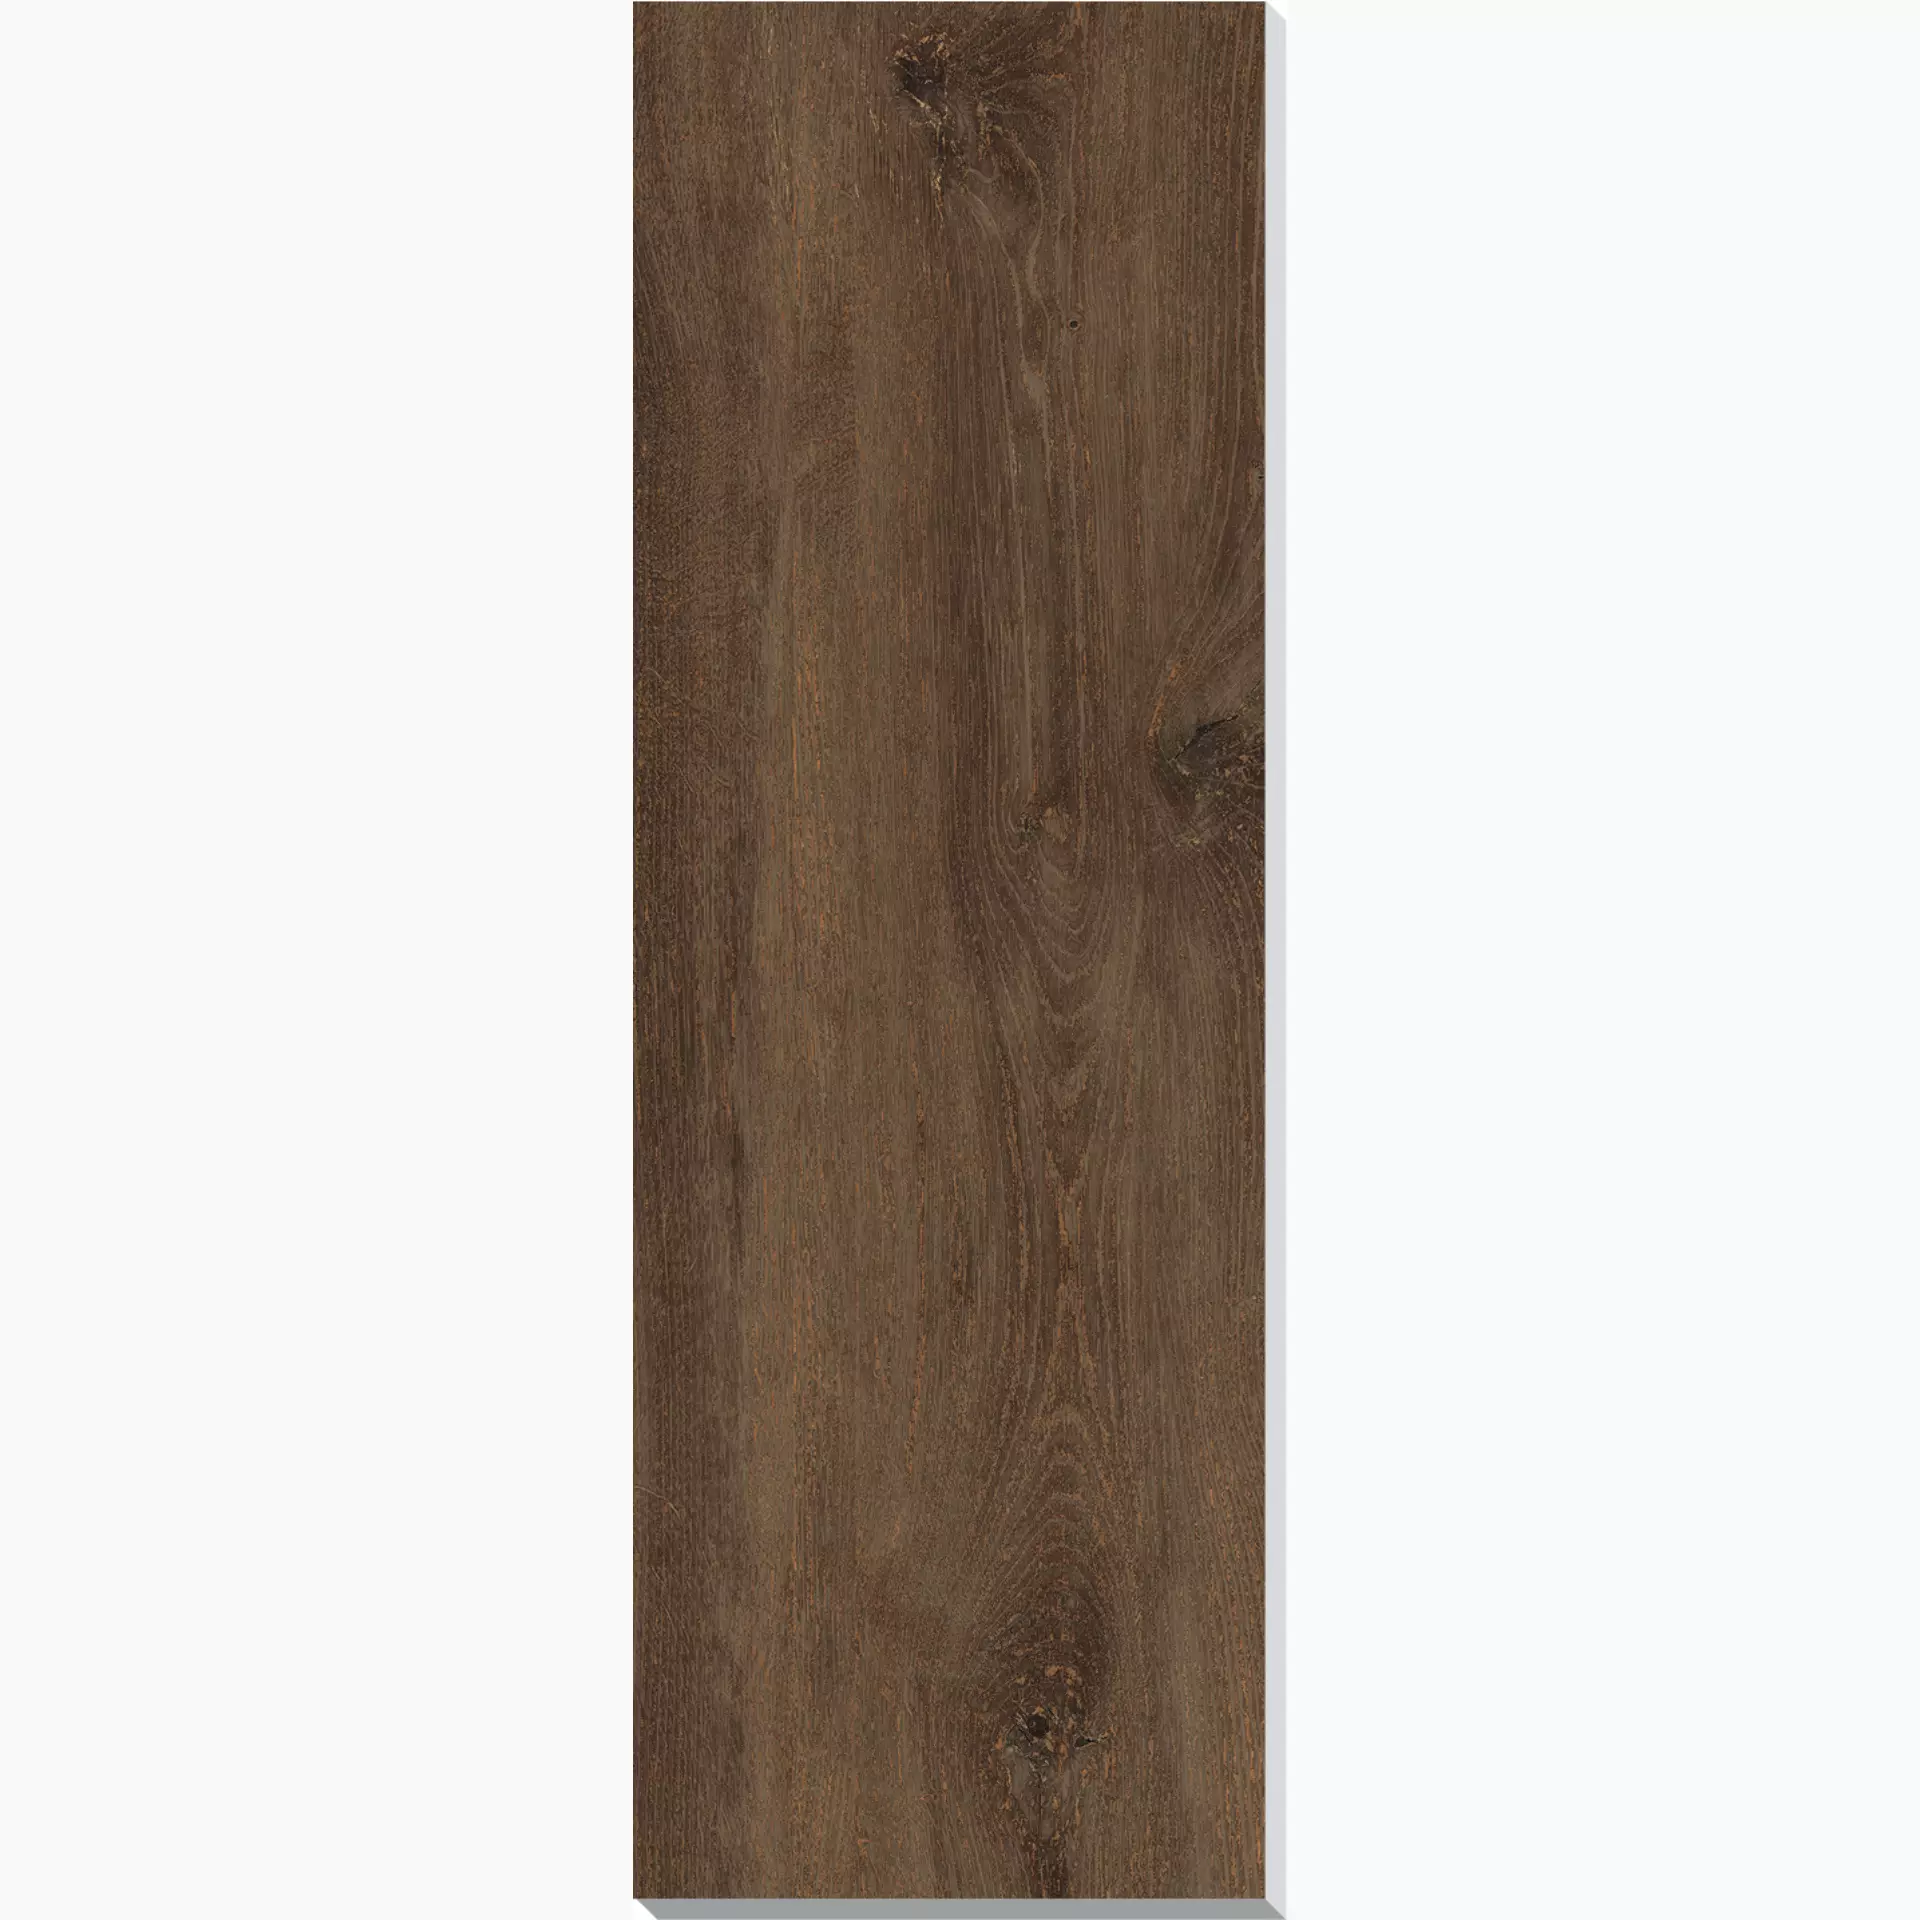 Novabell Artwood Wenge Outwalk – Naturale AWD62RT 40x120cm rectified 20mm